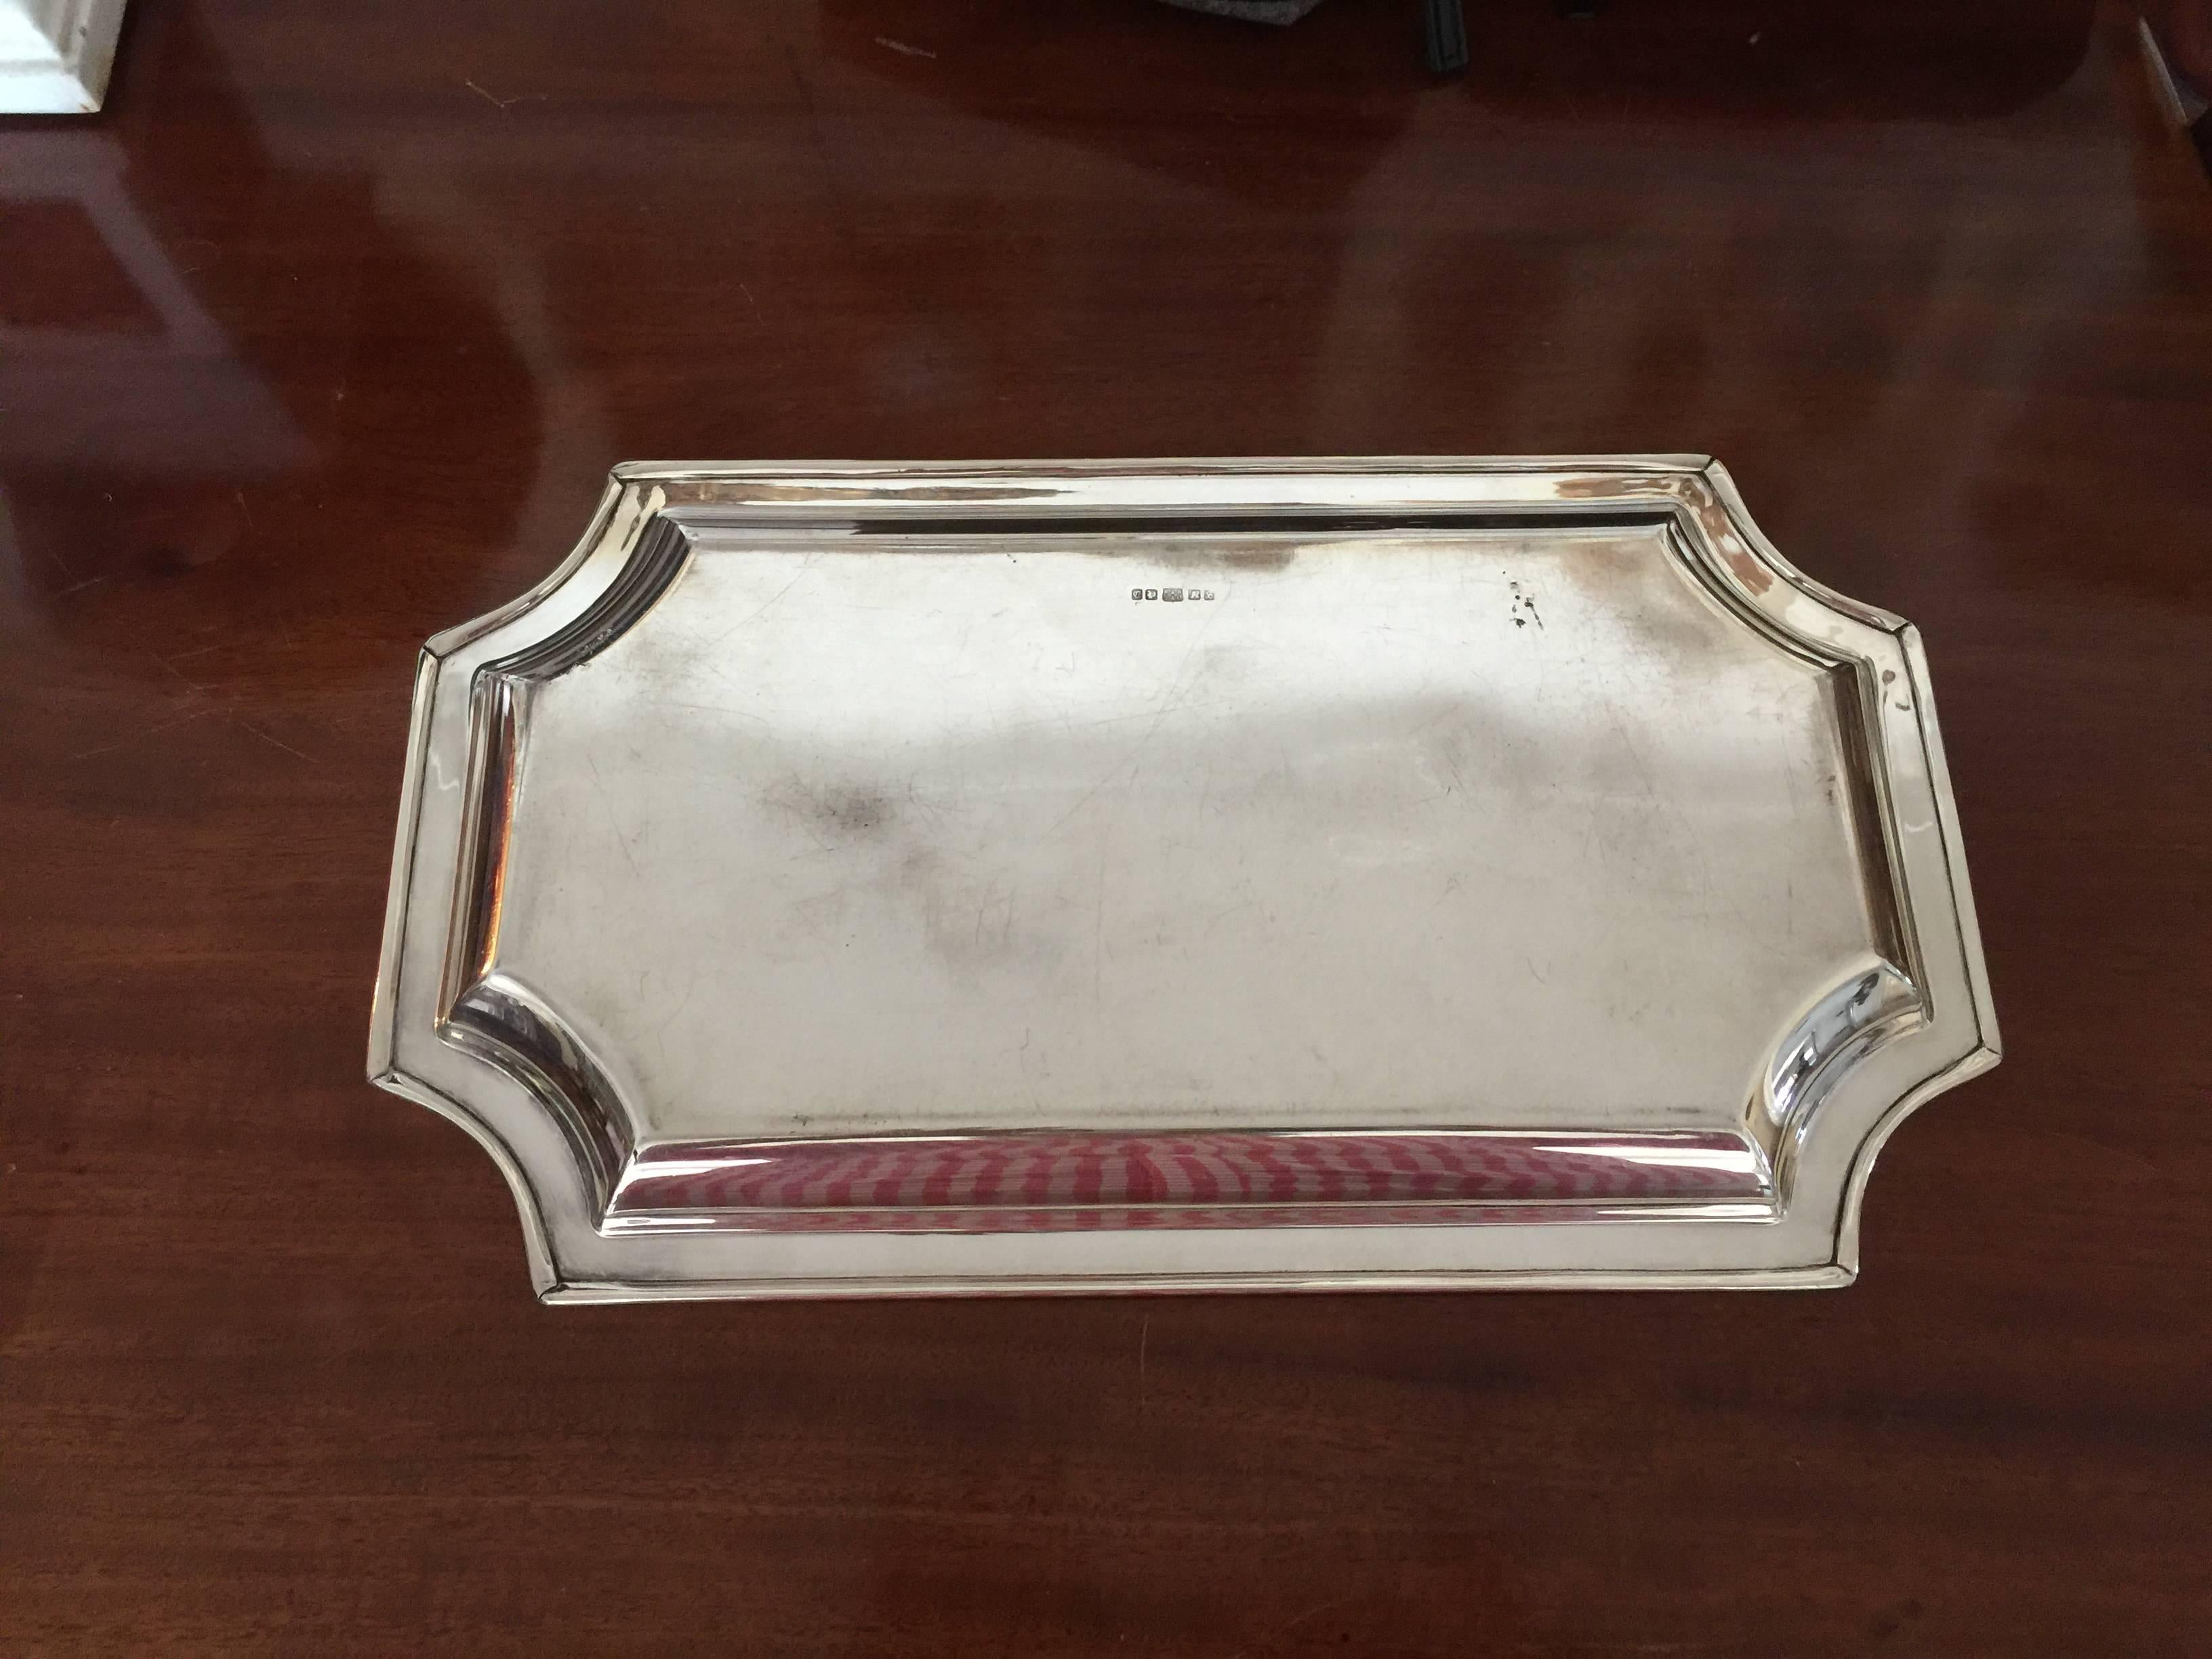 The octagonal tray with molded edges.